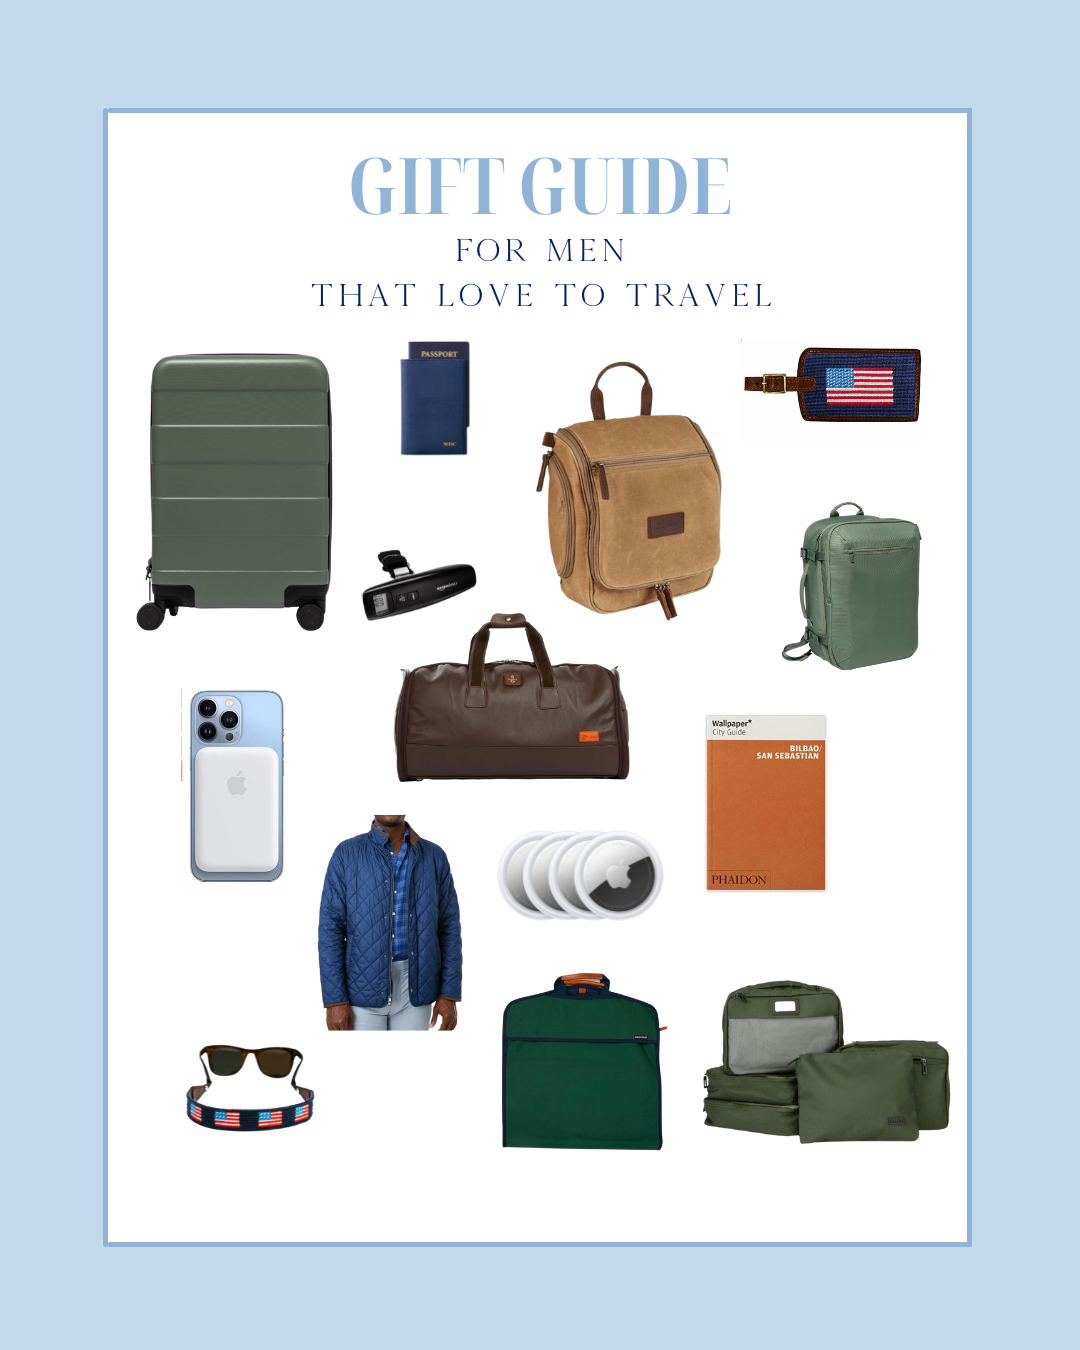 Gift guide for men that love to travel